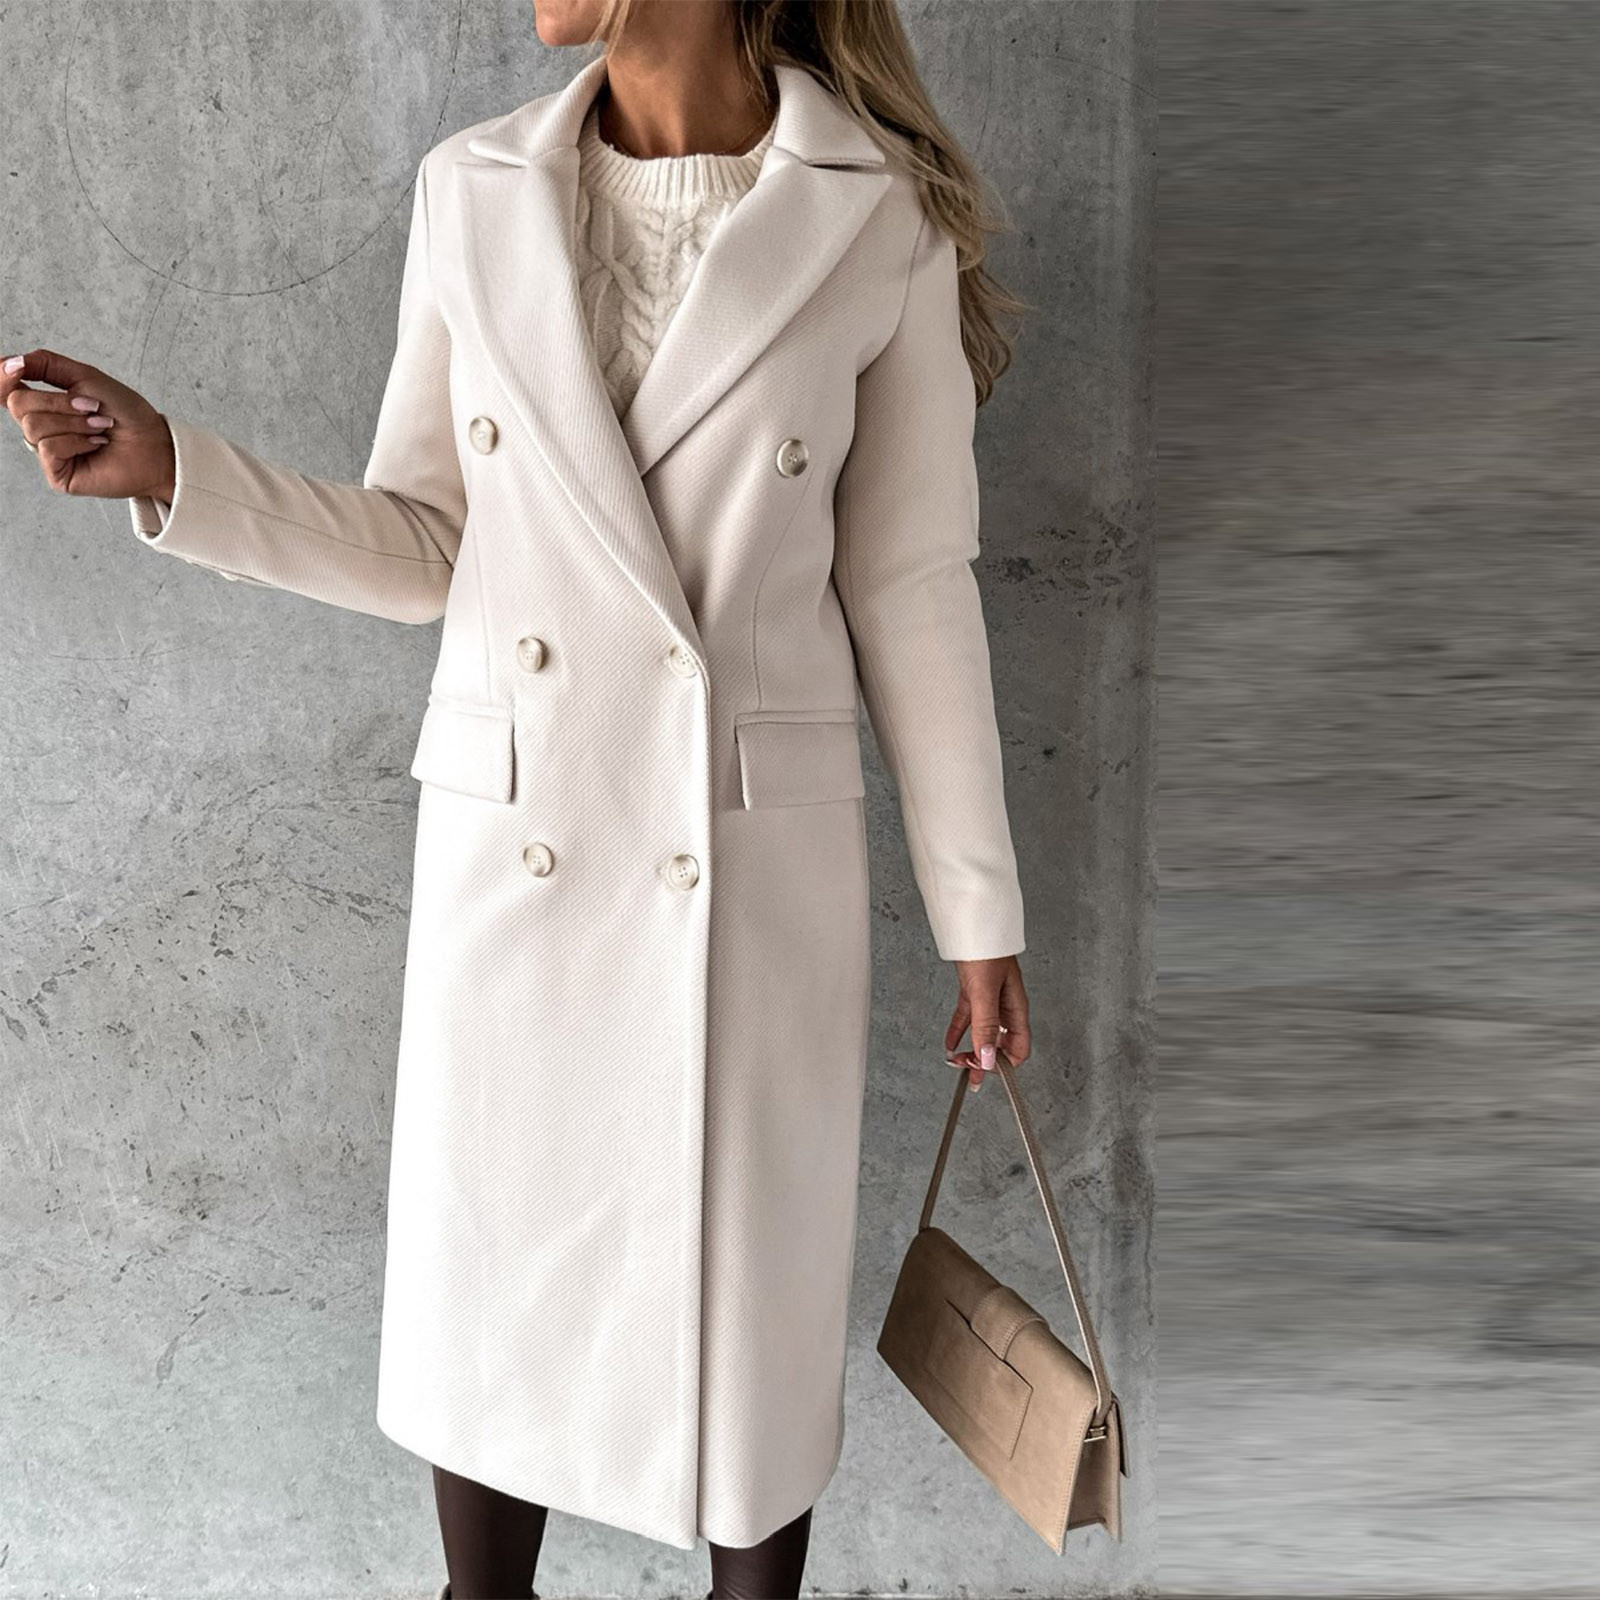 Hfyihgf Women's Double Breasted Trench Coat Classic Notch Collar Long Sleeve Peacoats Winter Warm Slim Fit Long Woolen Jackets Coat with Pockets Clearance(Beige,L) - image 2 of 5